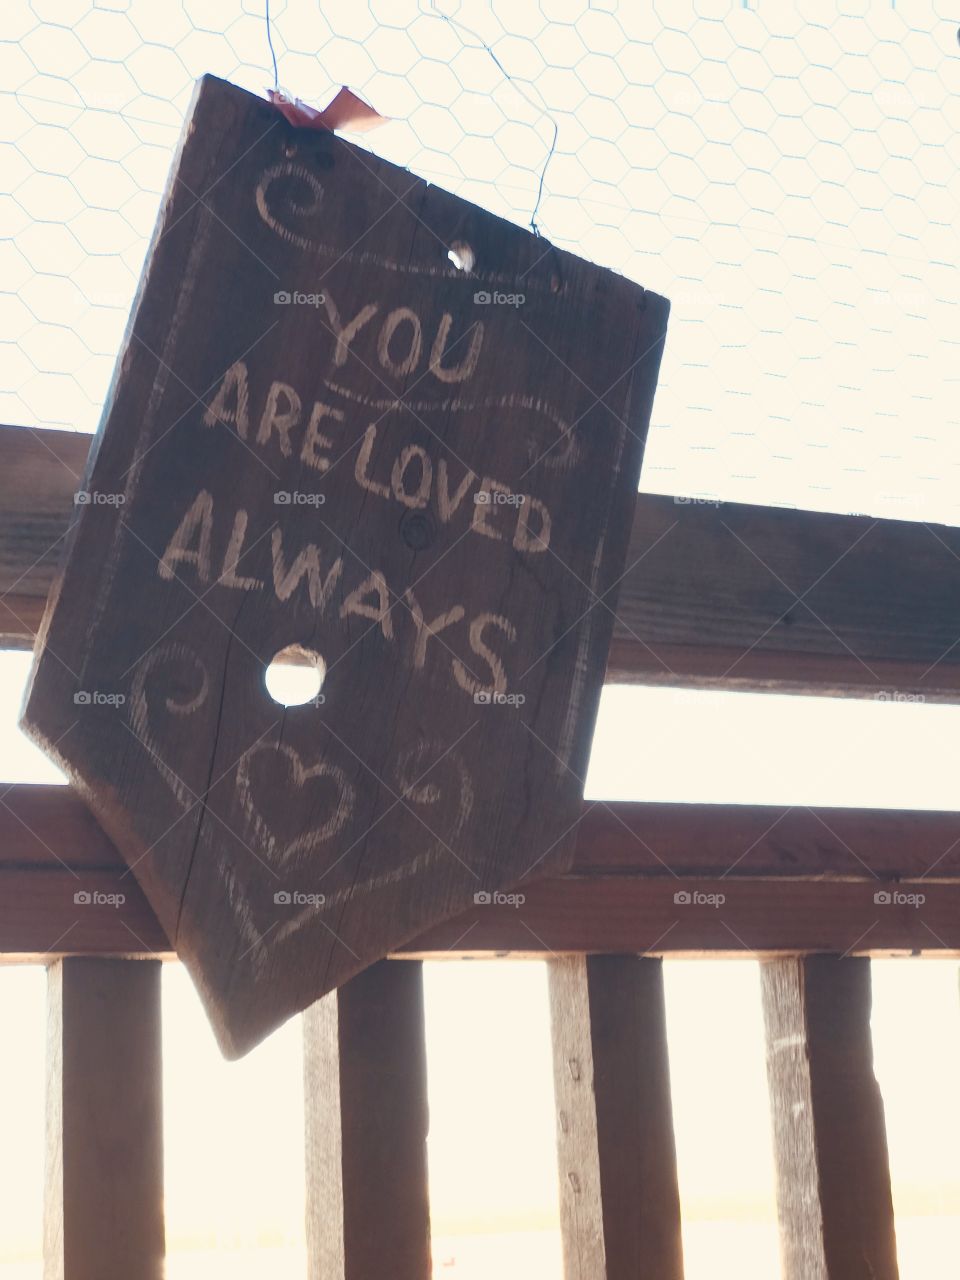 you are loved always